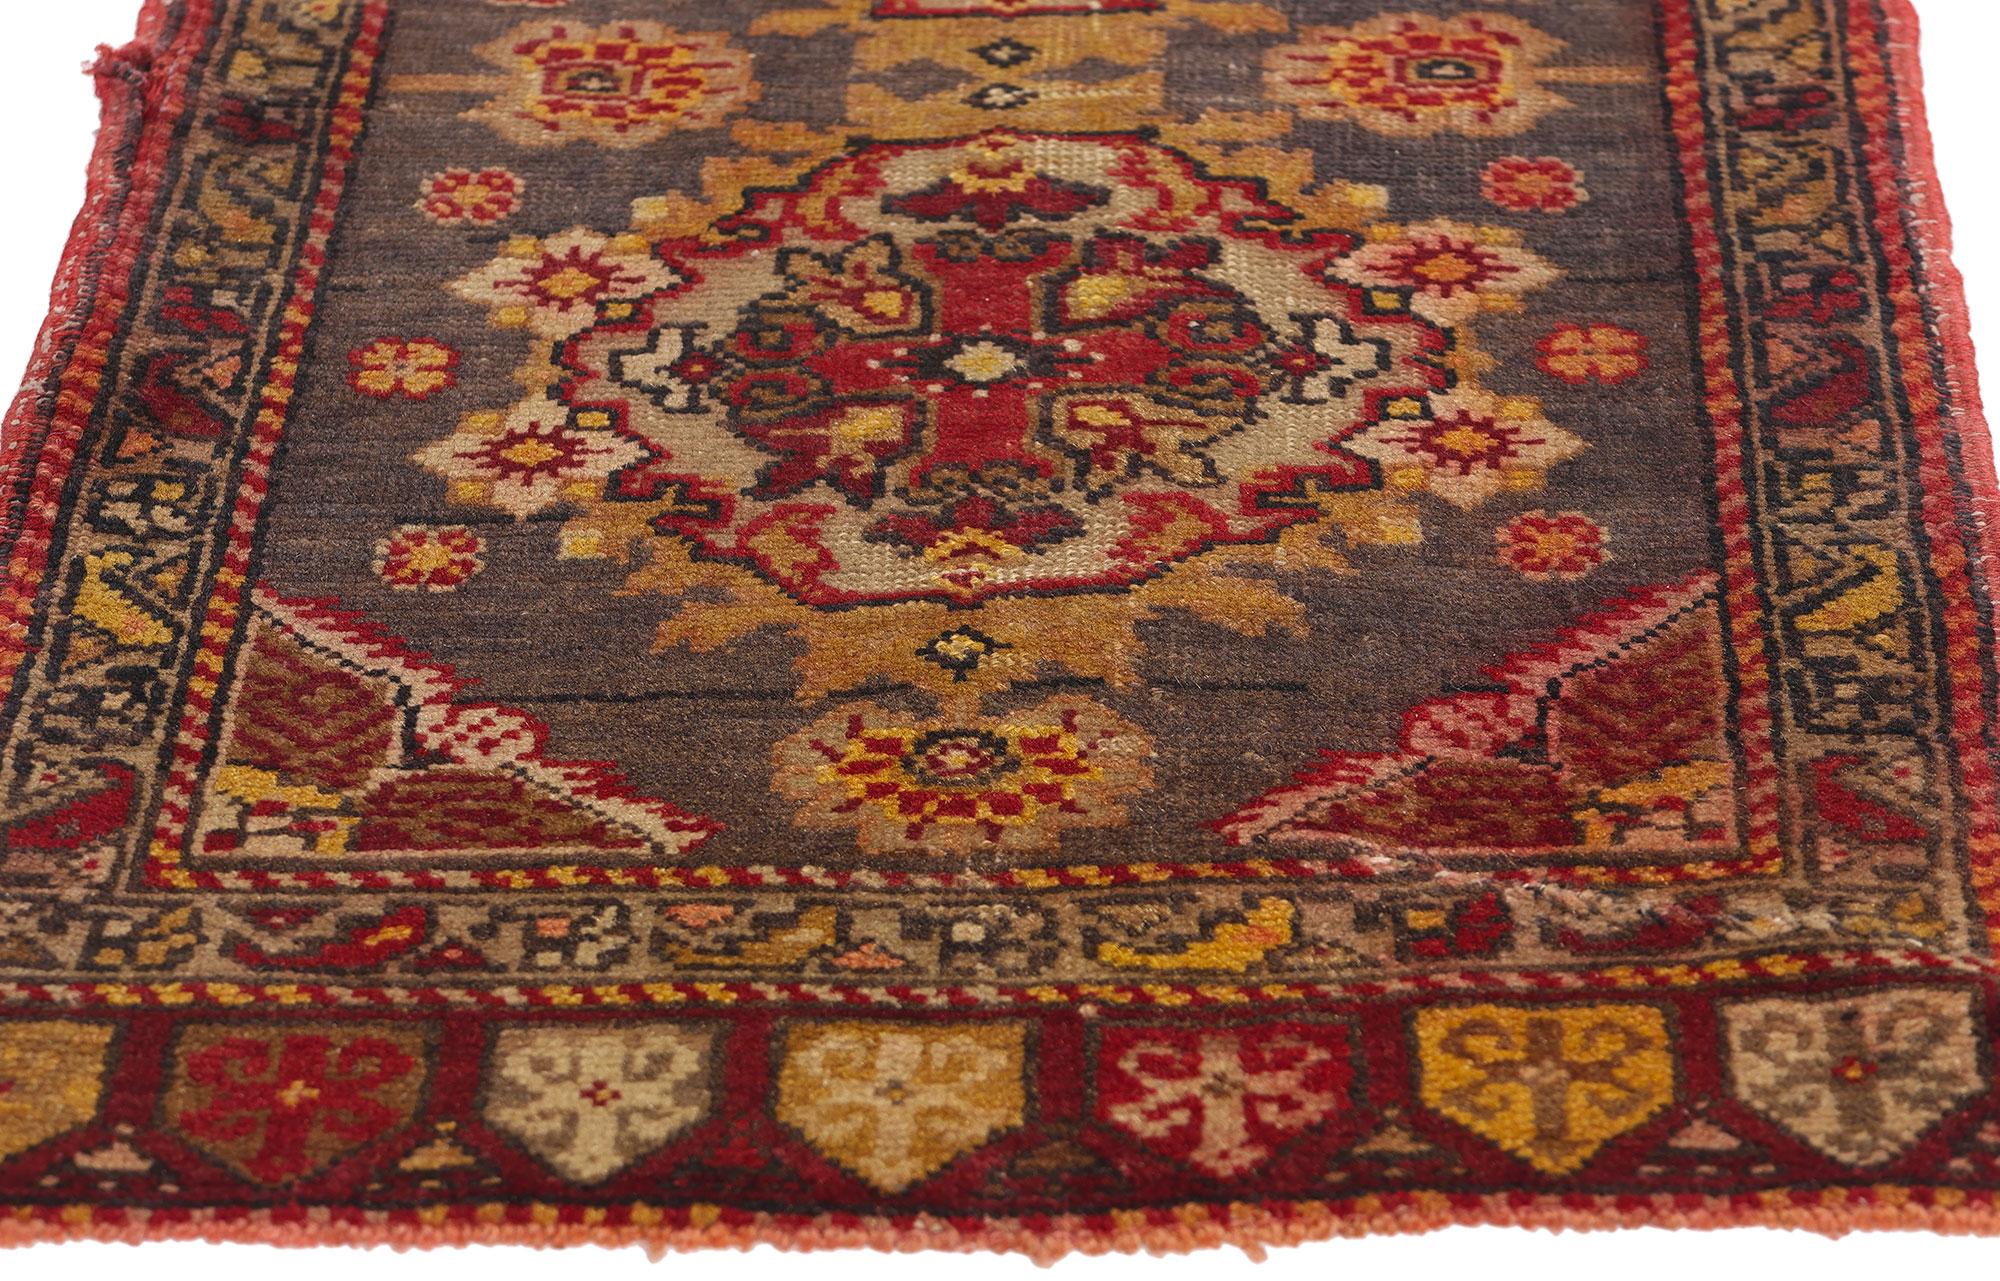 Vintage Turkish Yastik Oushak Carpet, Timeless Appeal Meets Stylish Durability In Good Condition For Sale In Dallas, TX